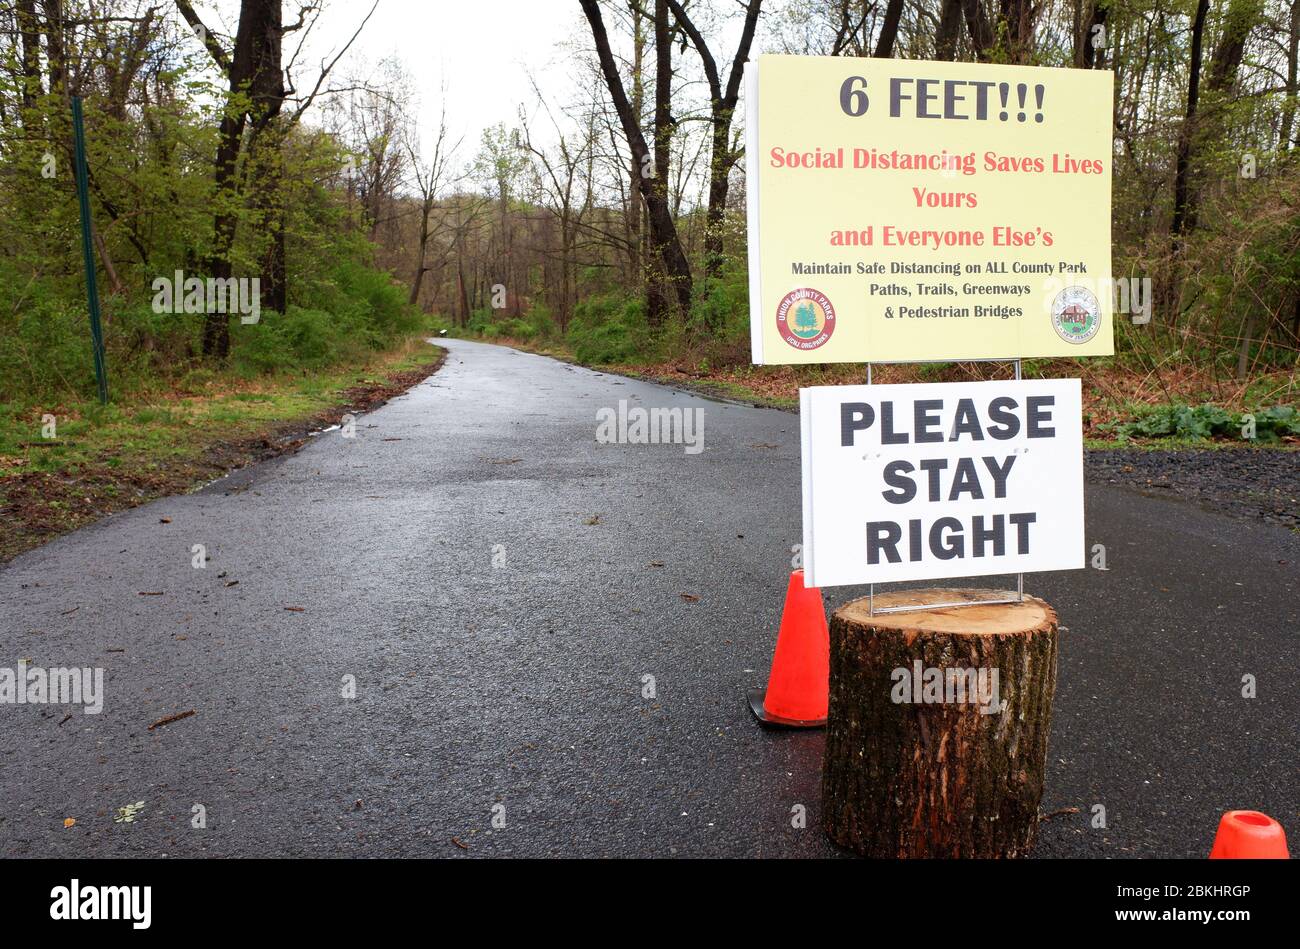 Warning sign of social distance at the entrance of the road to the deserted Village of Feltville during the lockdown of covid-19 coronavirus pandemic outbreak.Watchung Reservation, Berkeley Heights.New Jersey.USA Stock Photo